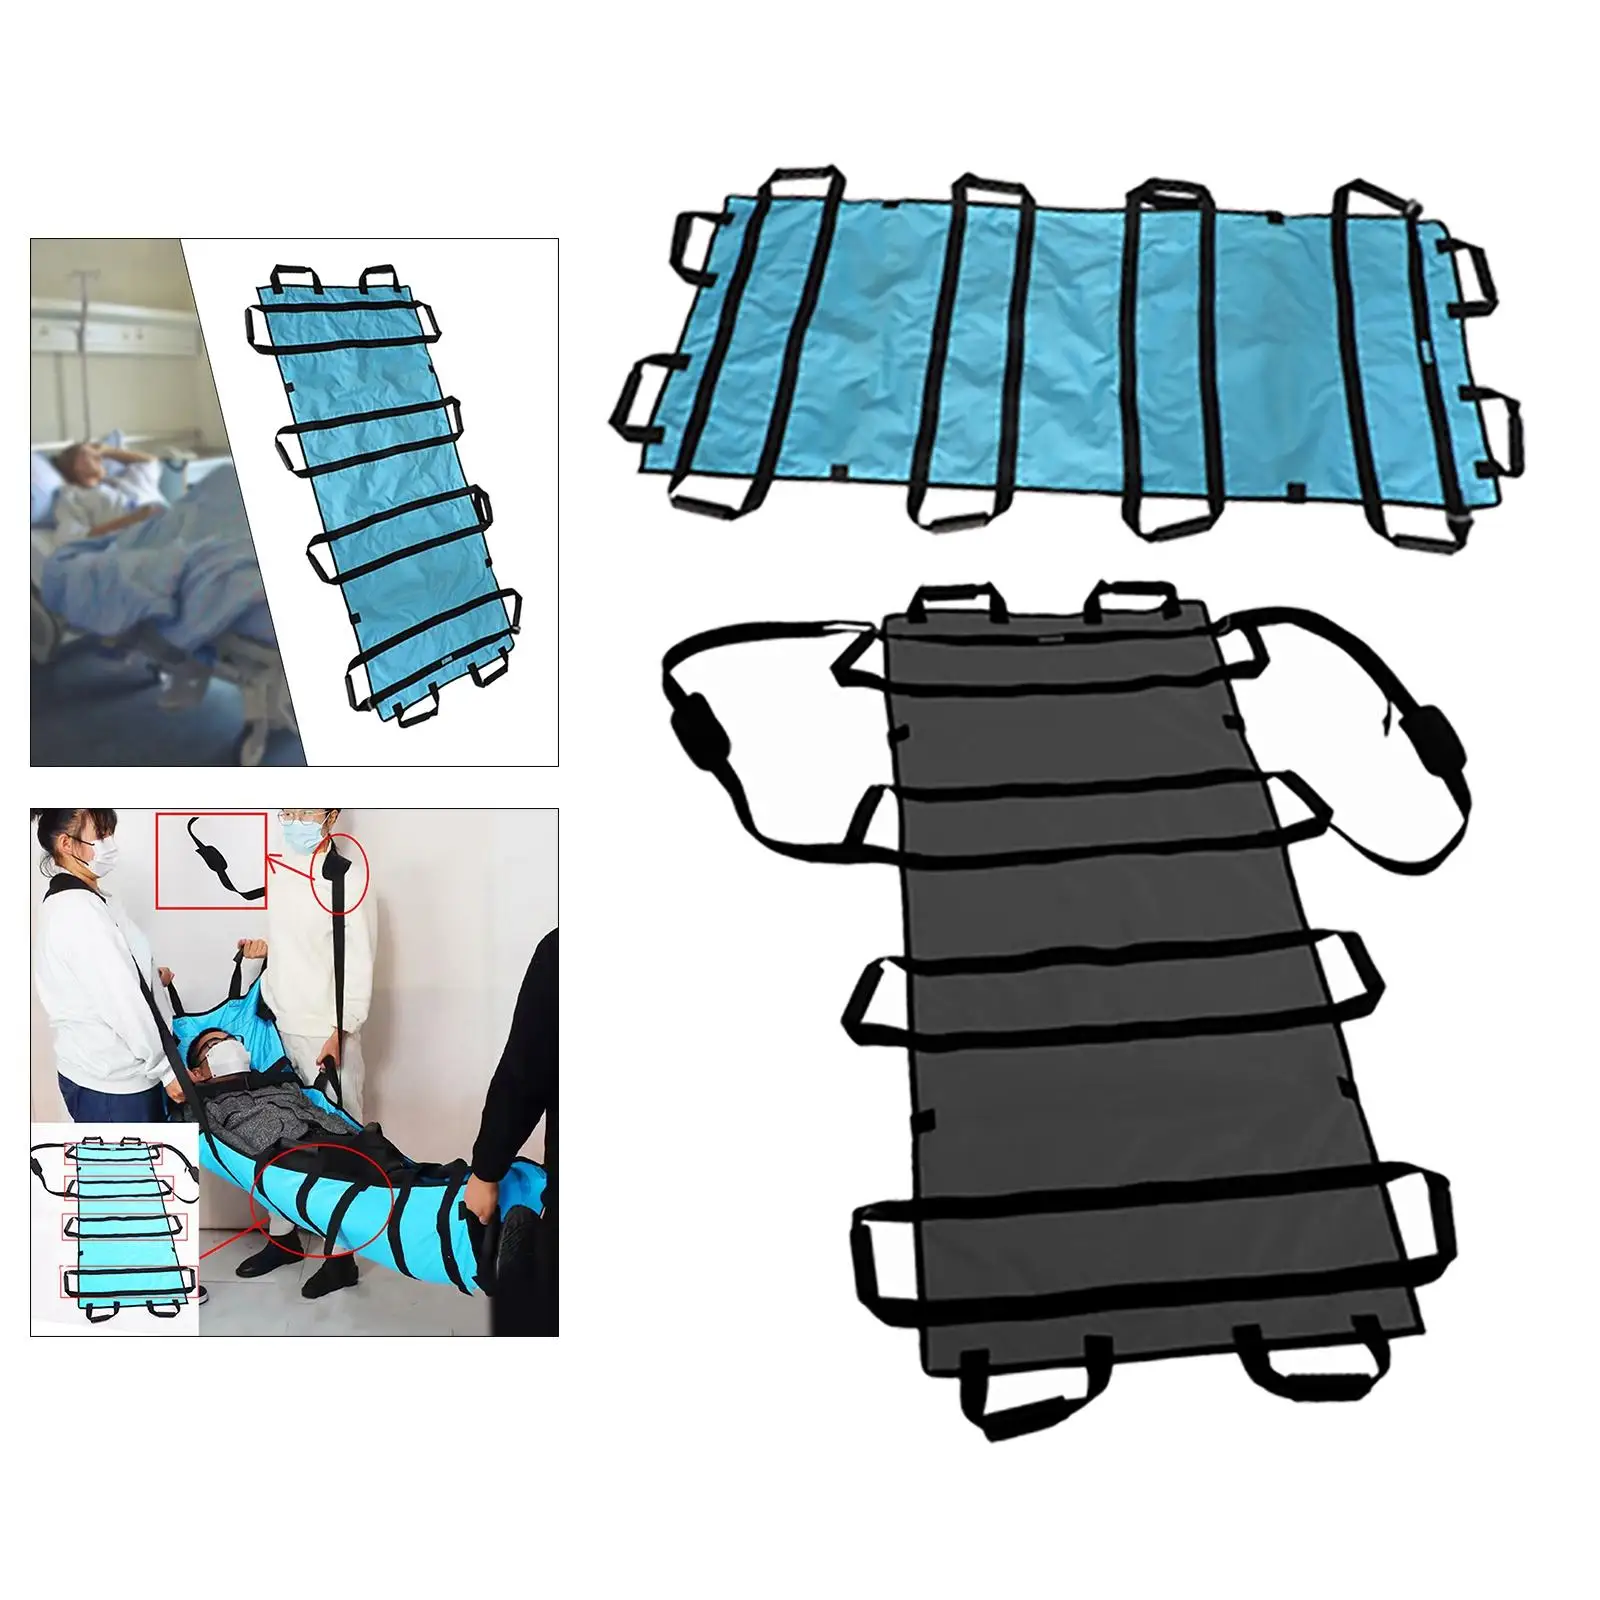 Household Soft Stretcher Transfer Board Positioning Bed Pad Foldable Stretcher for Disability Aids Paralyzed Turning Lifting